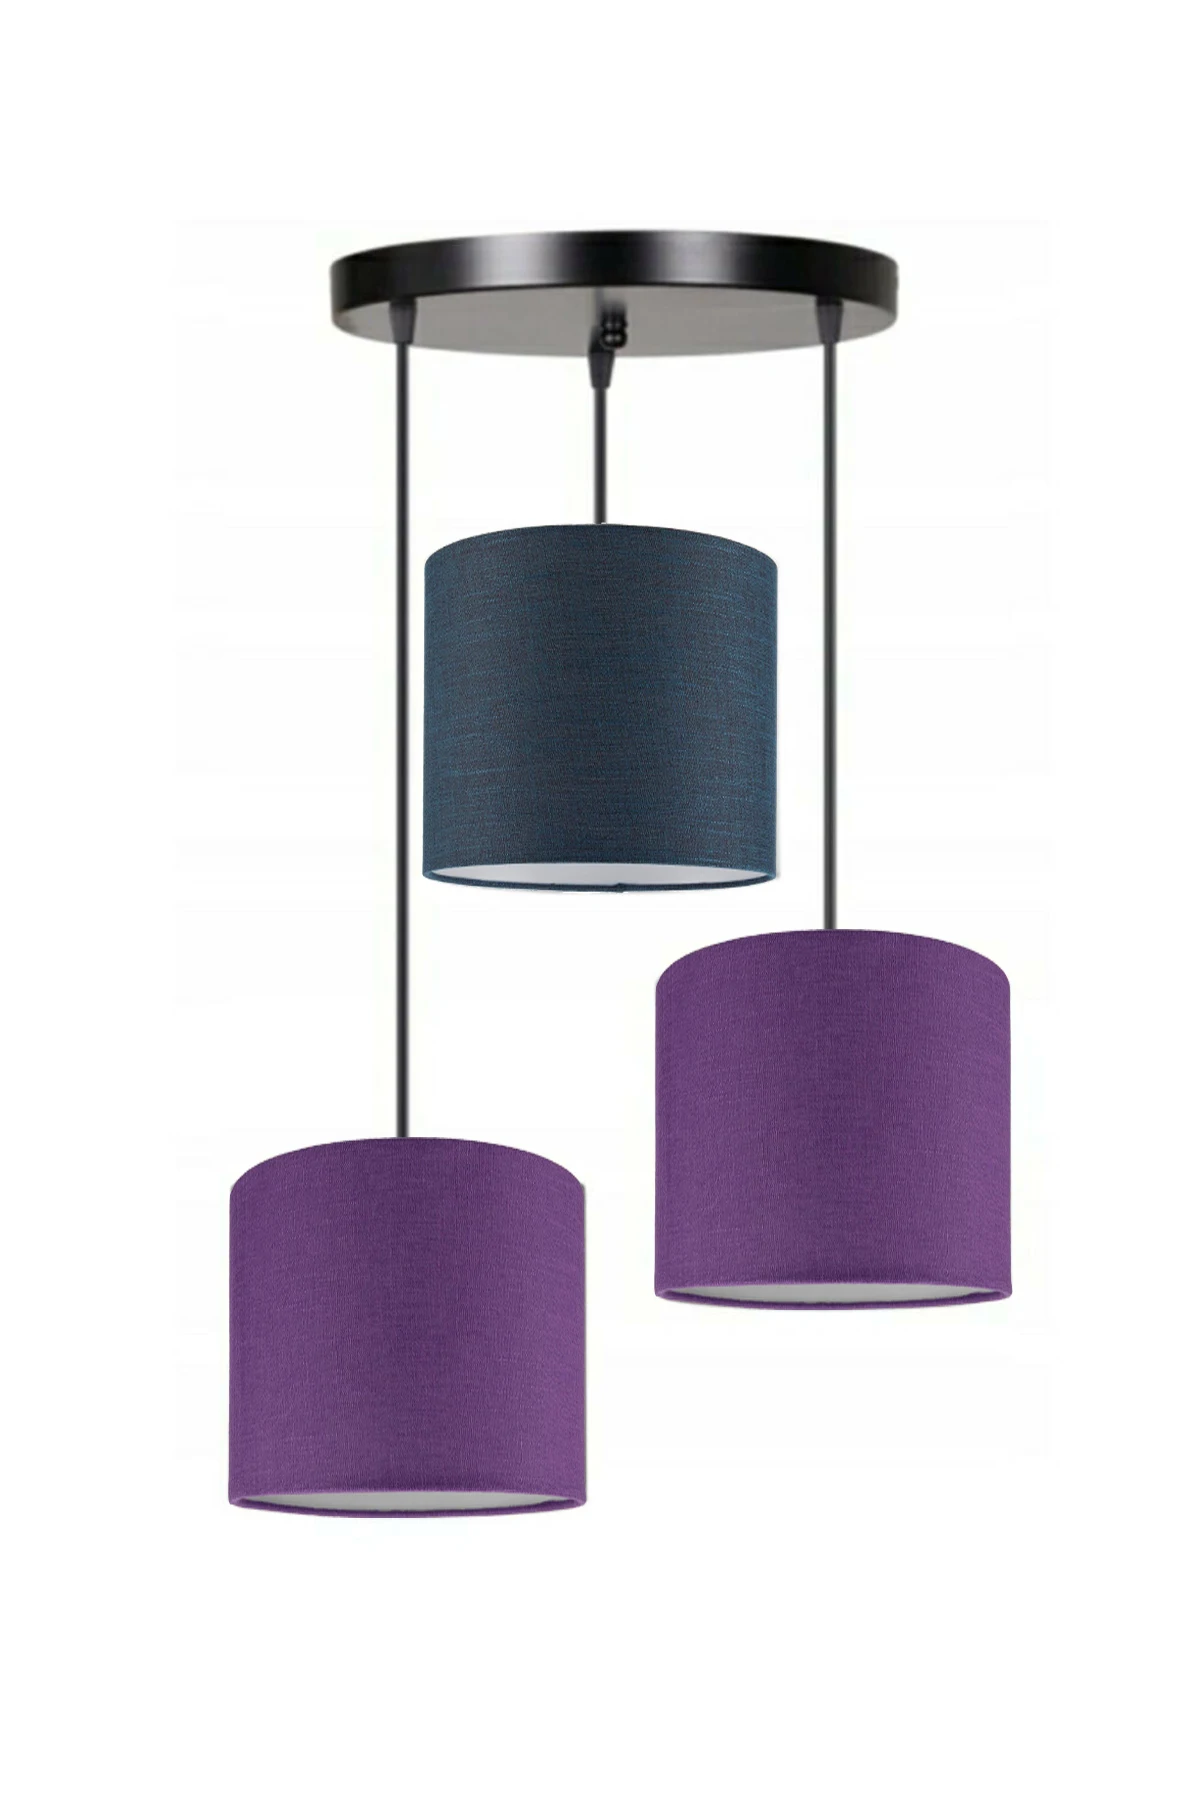 3 Heads 2 Purple 1 Navy Blue Cylinder Fabric Lampshade Pendant Lamp Chandelier Modern Decorative Design For Home Hotel Office